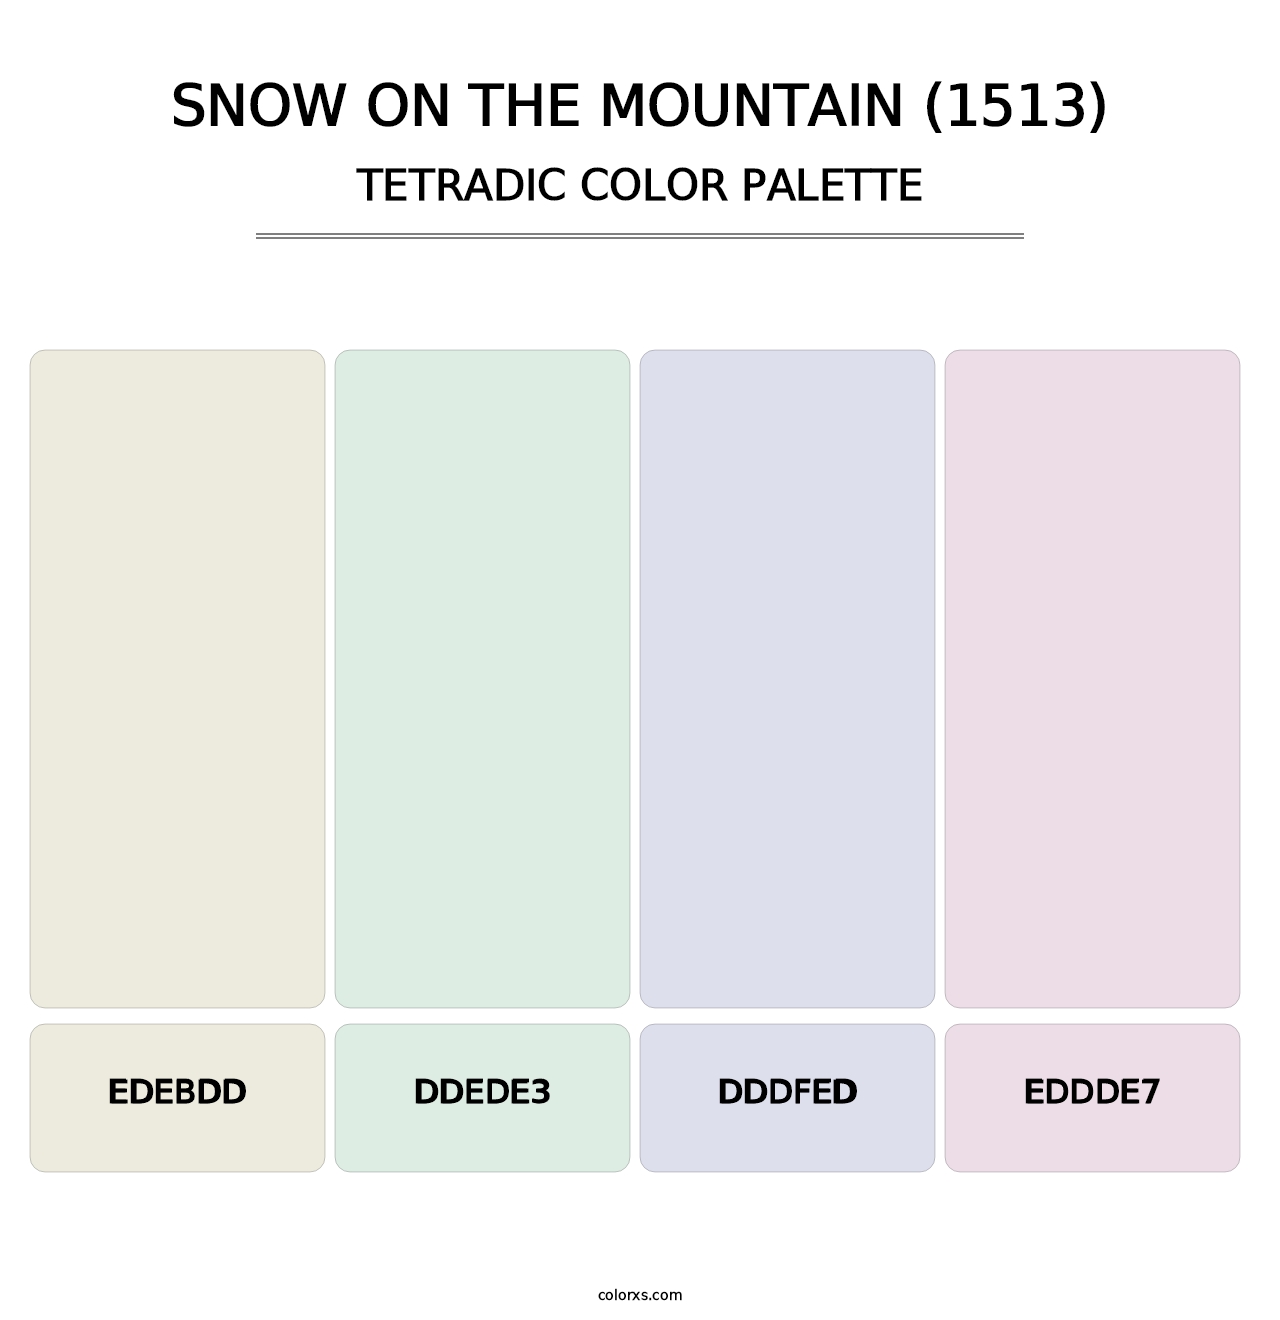 Snow on the Mountain (1513) - Tetradic Color Palette